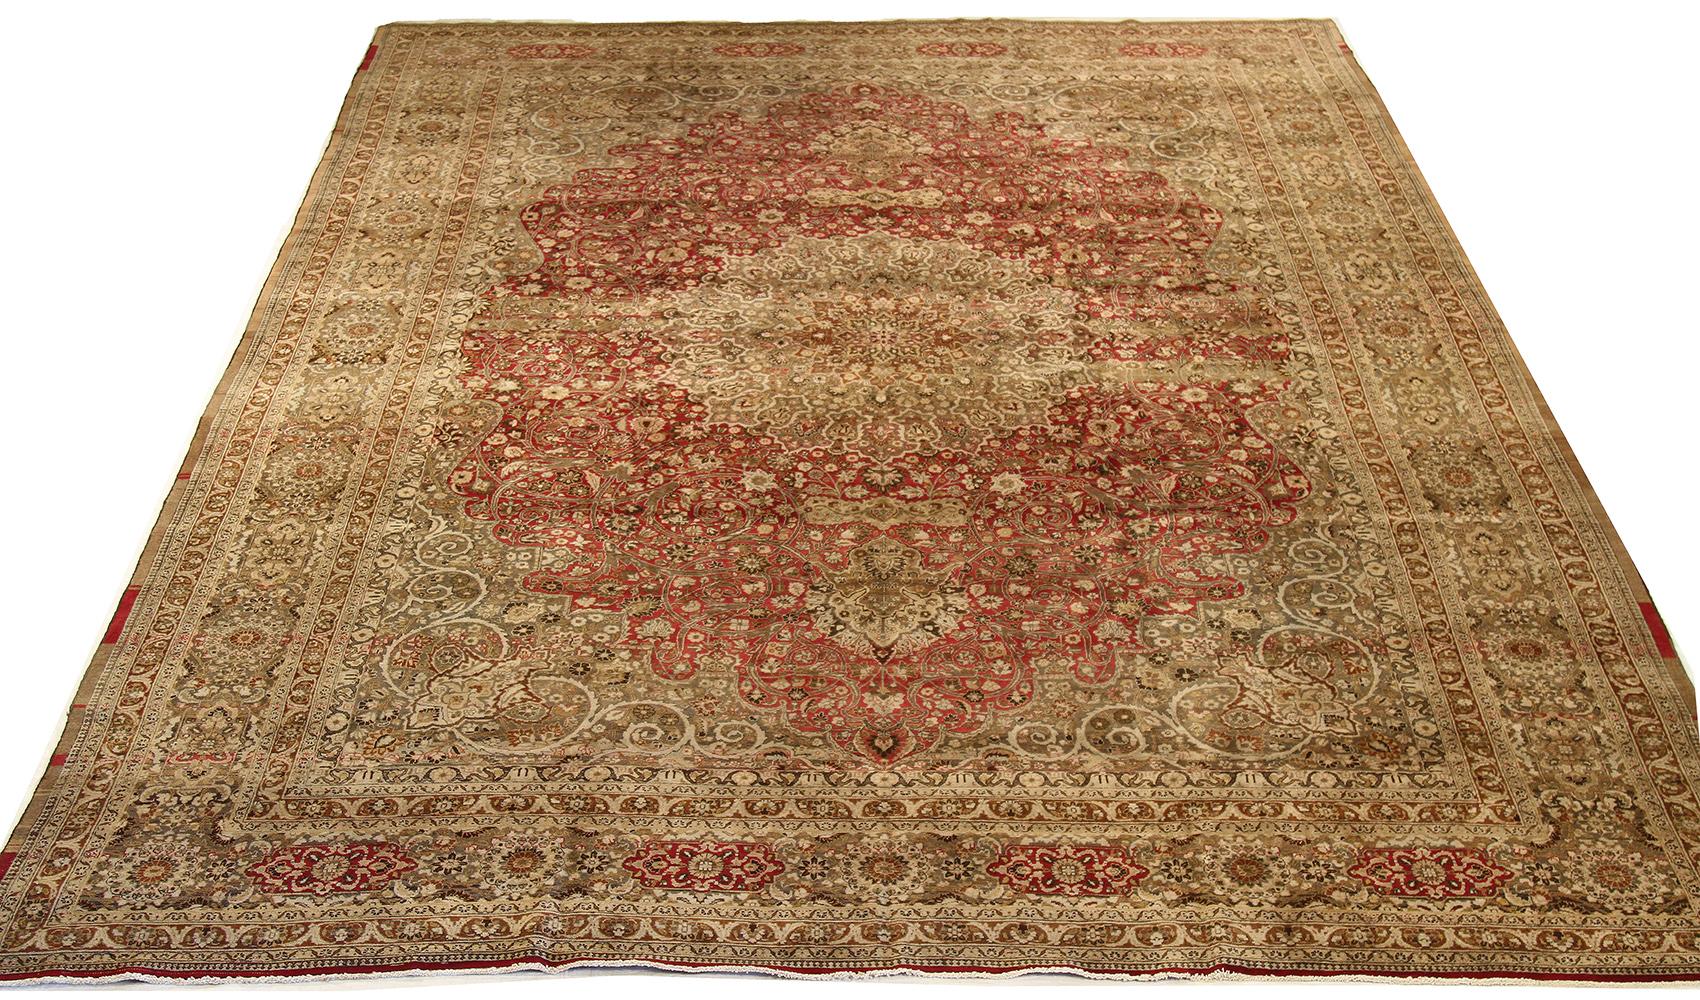 Antique Persian rug handwoven from the finest sheep’s wool and colored with all-natural vegetable dyes that are safe for humans and pets. It’s a special contemporary Mashad design featuring beige and brown floral details over a deep red field. It’s